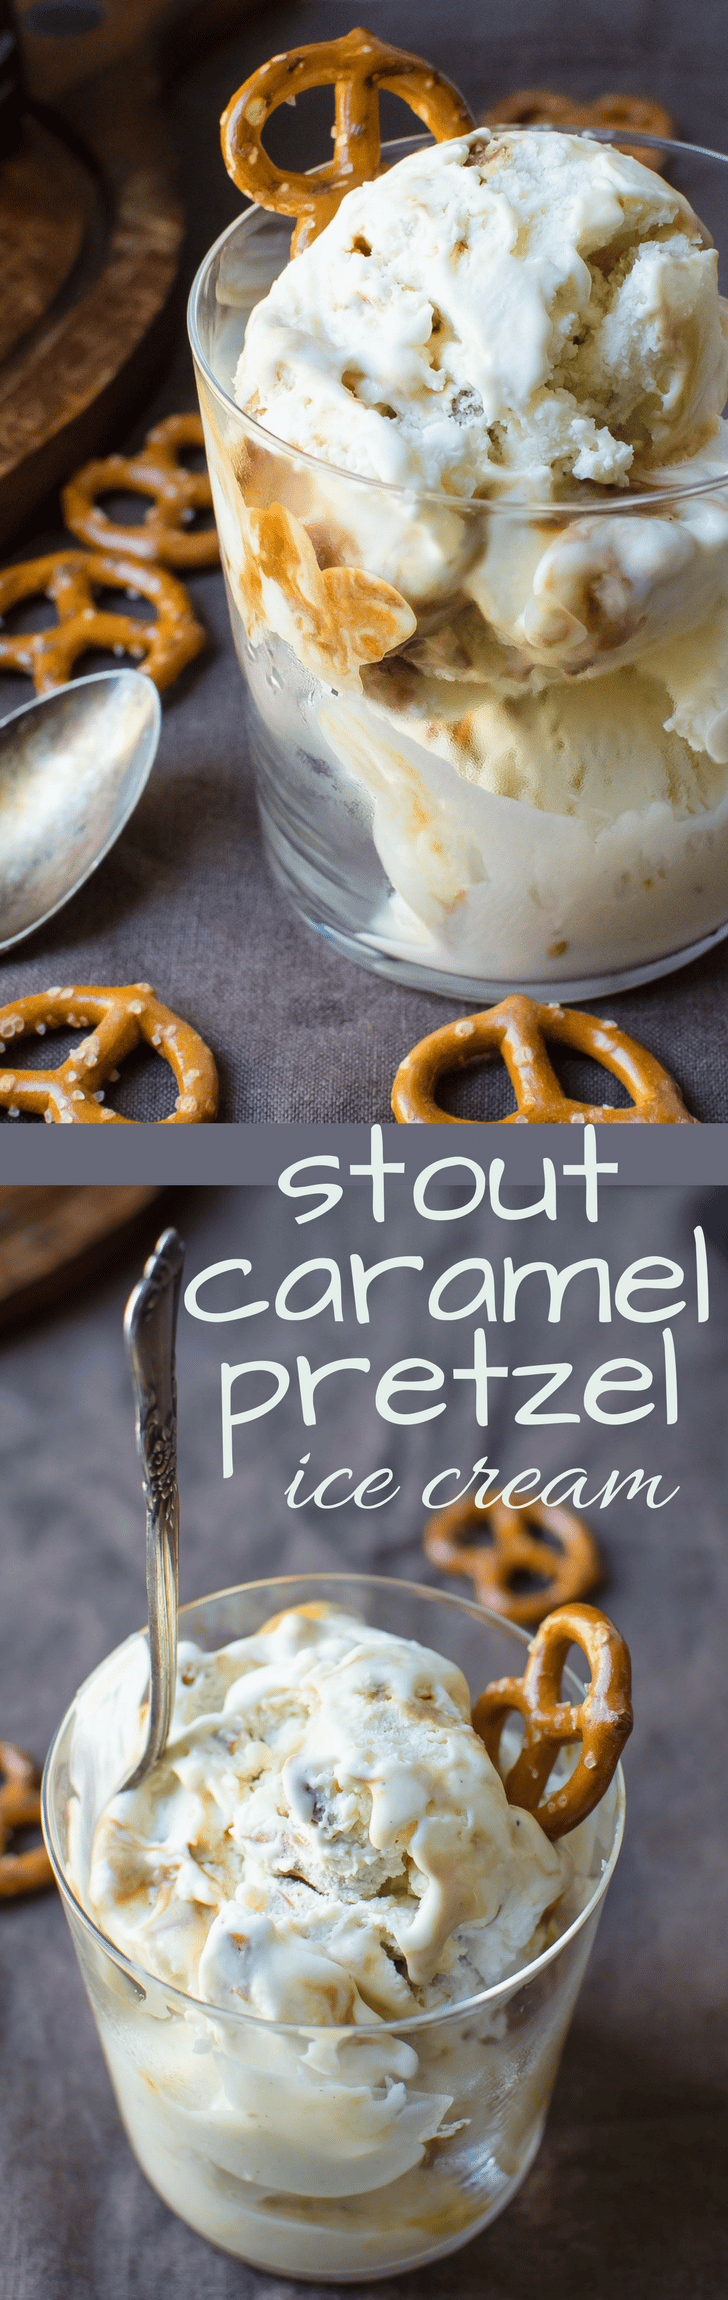 This Irish Stout sweet treat made with Guinness is rich and creamy! Stout Caramel Pretzel Ice Cream is the bar food answer to dessert! #icecream #guinness #stout #caramelsauce #pretzels #homemadeicecream #stpattysday #stpattysdessert #stpatricksday #dessert